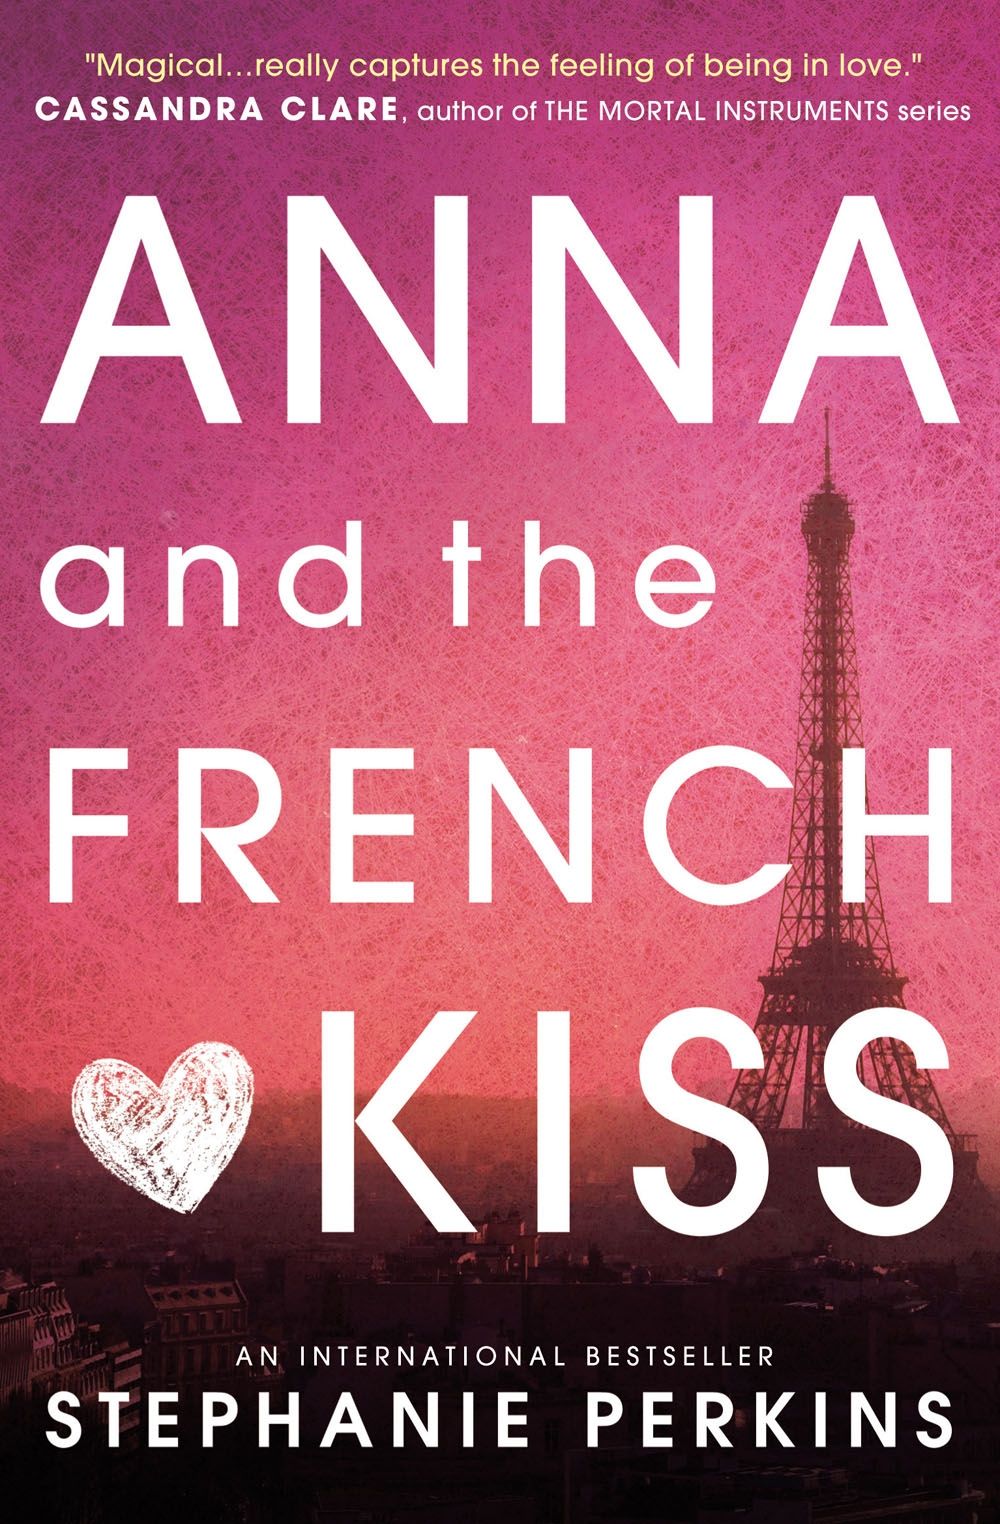 Anna and the French Kiss | Stephanie Perkins